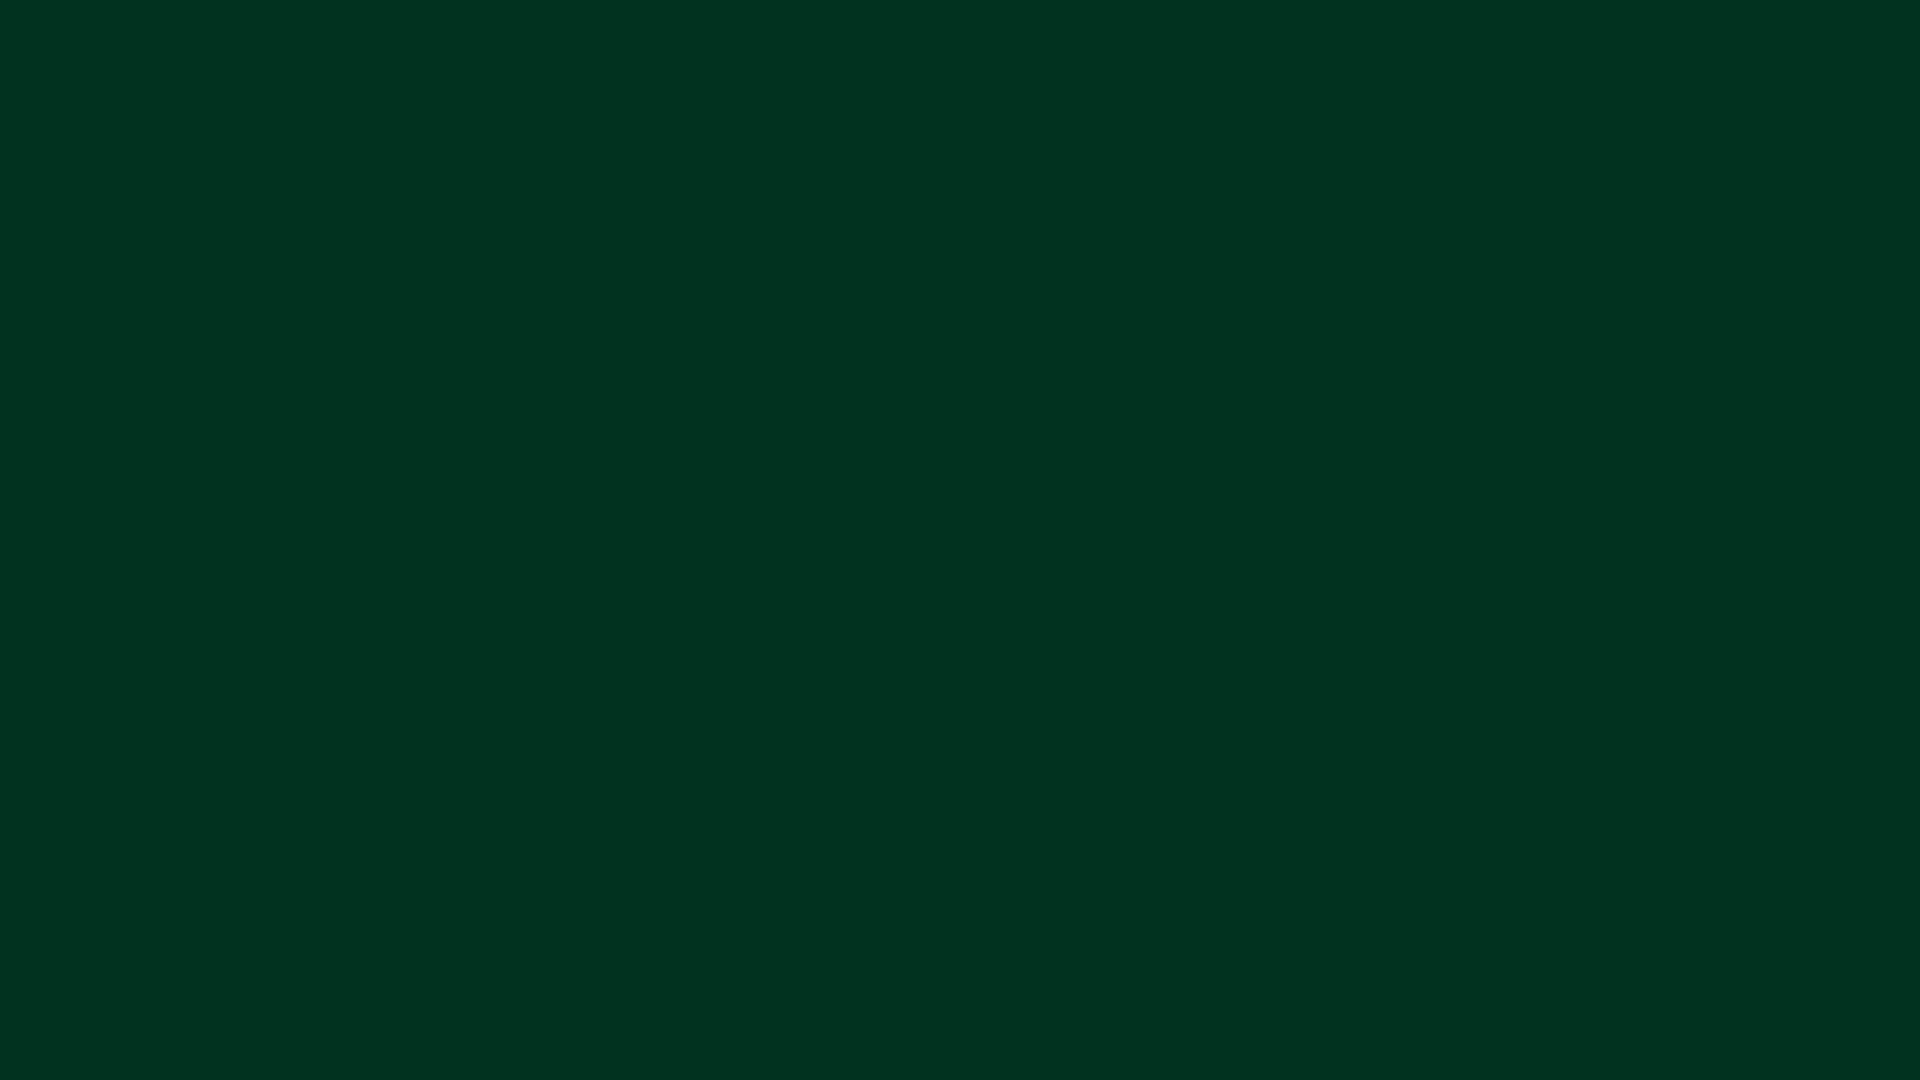 Solid Dark Green Background Image Pictures Becuo